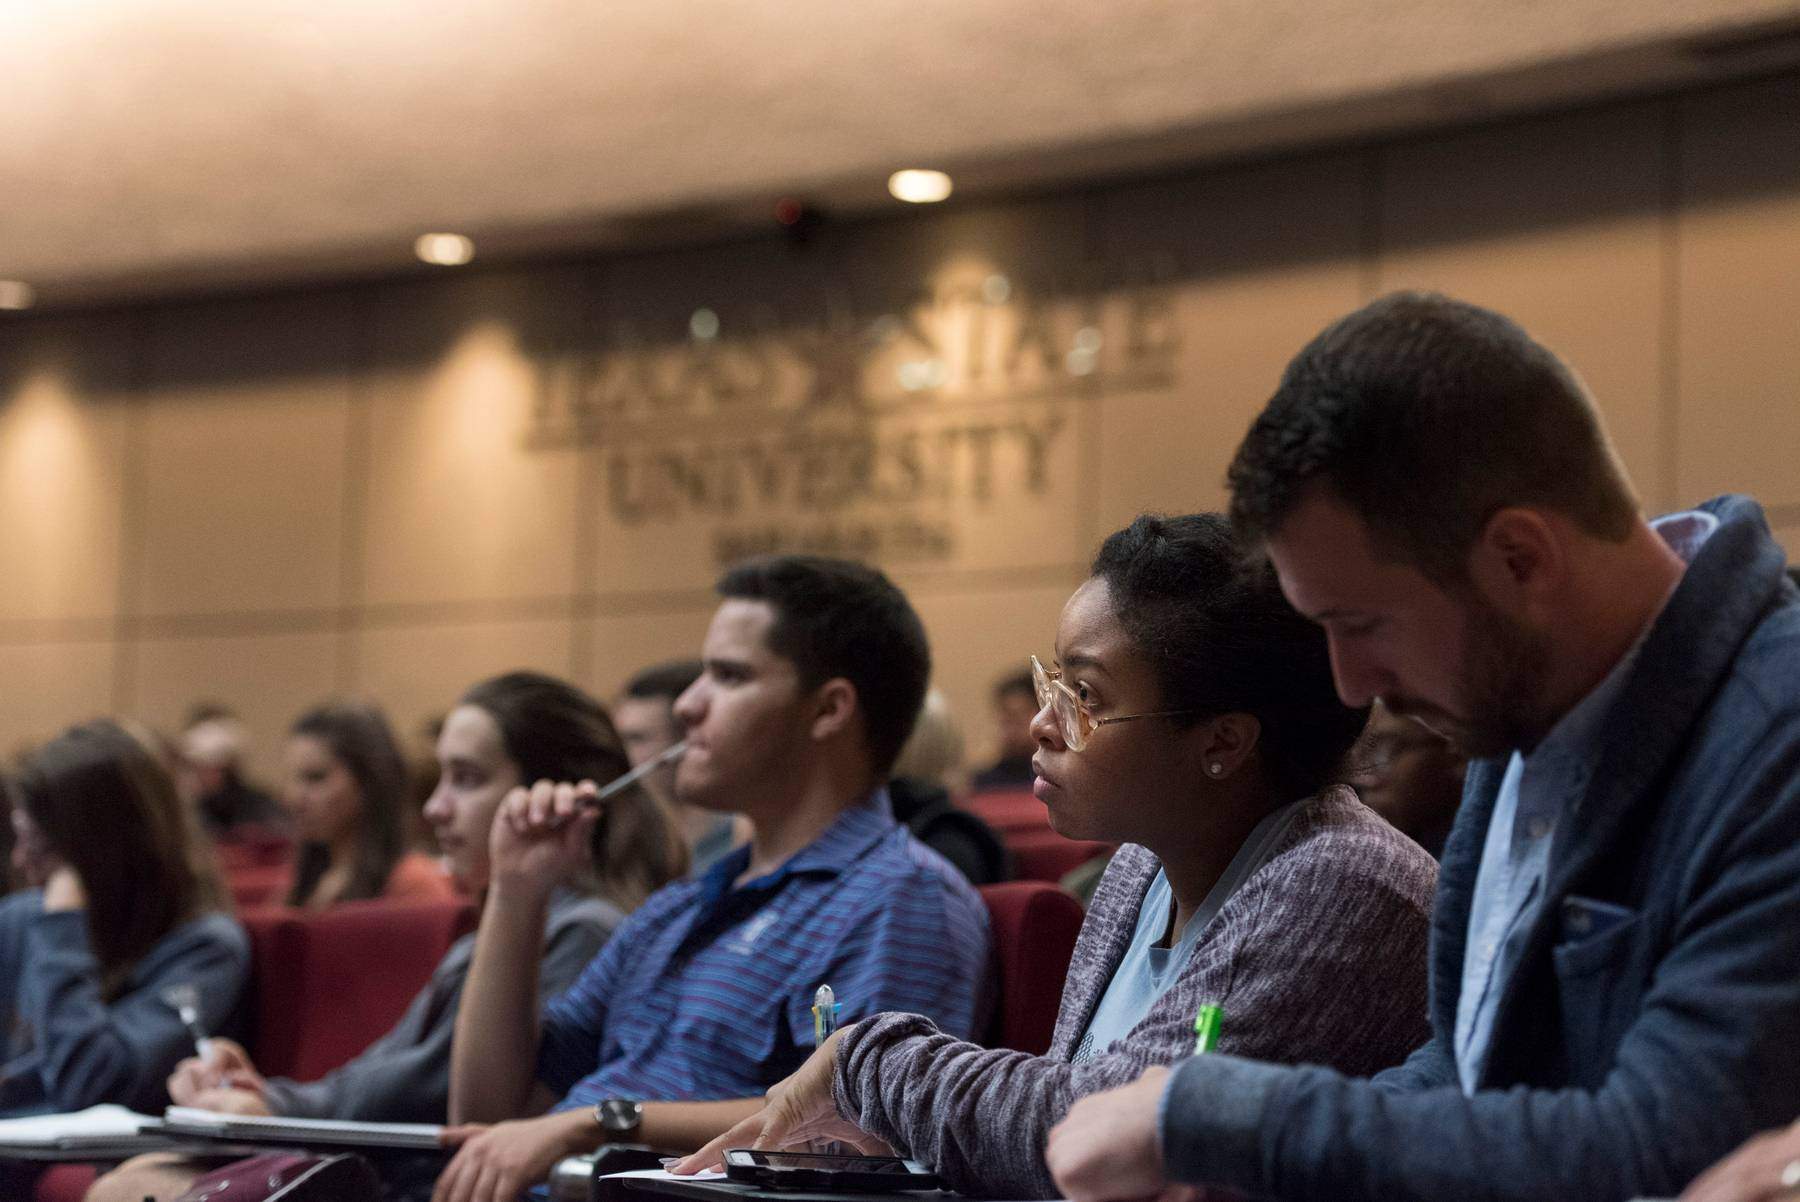 Students in a lecture hall, listening to a lecture.